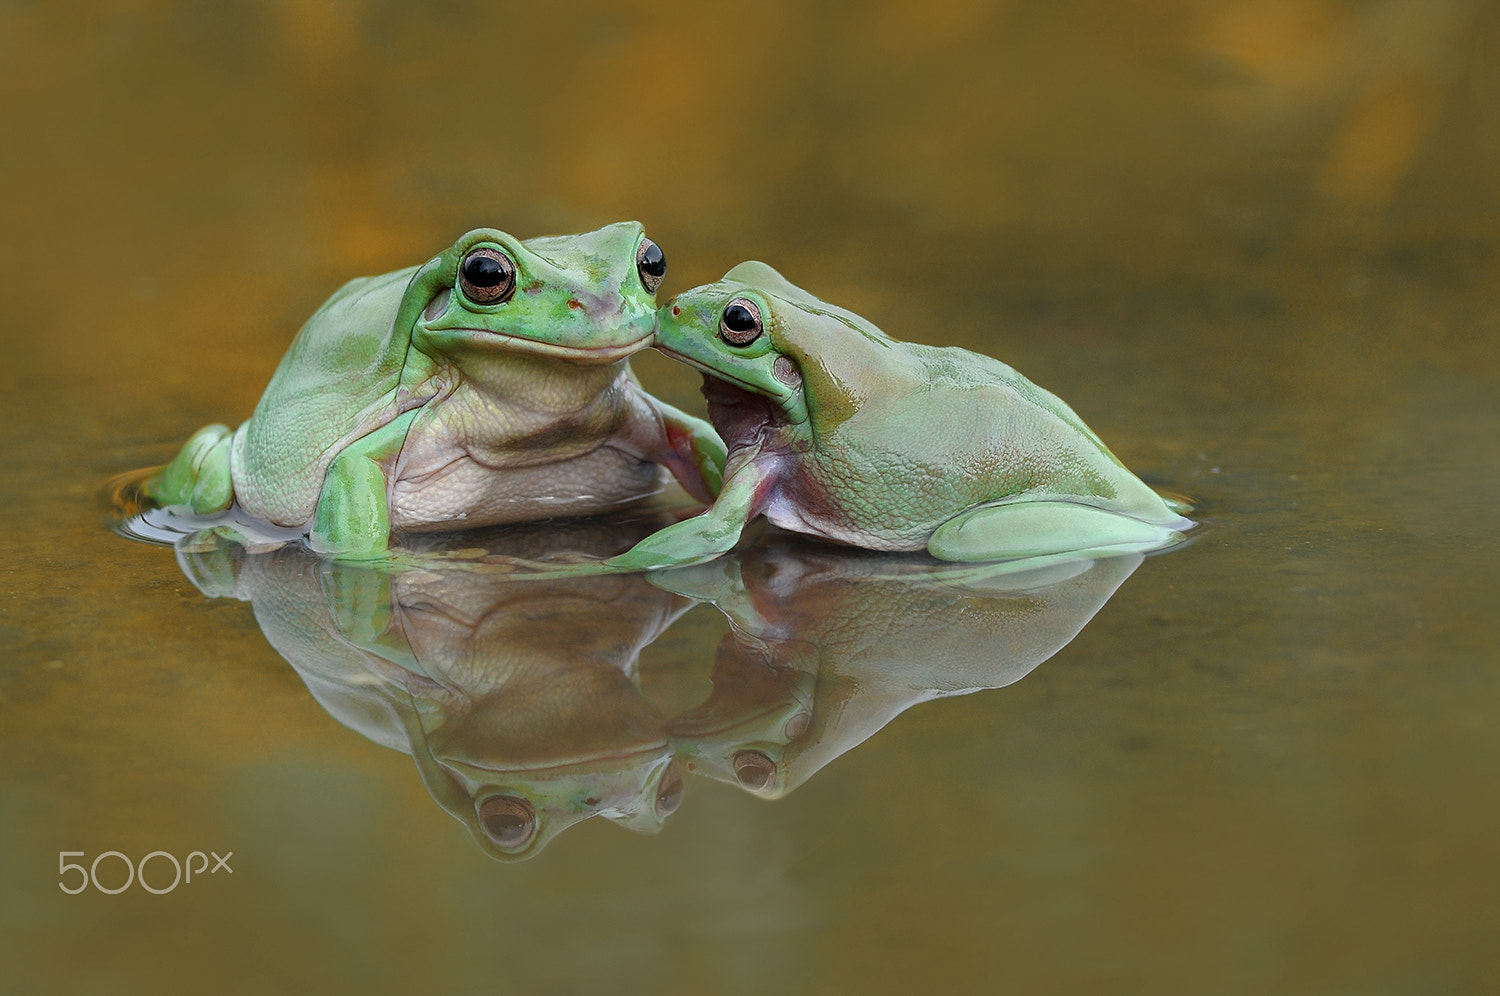 Nikon D90 sample photo. You and me, two frog, dumpy frog photography